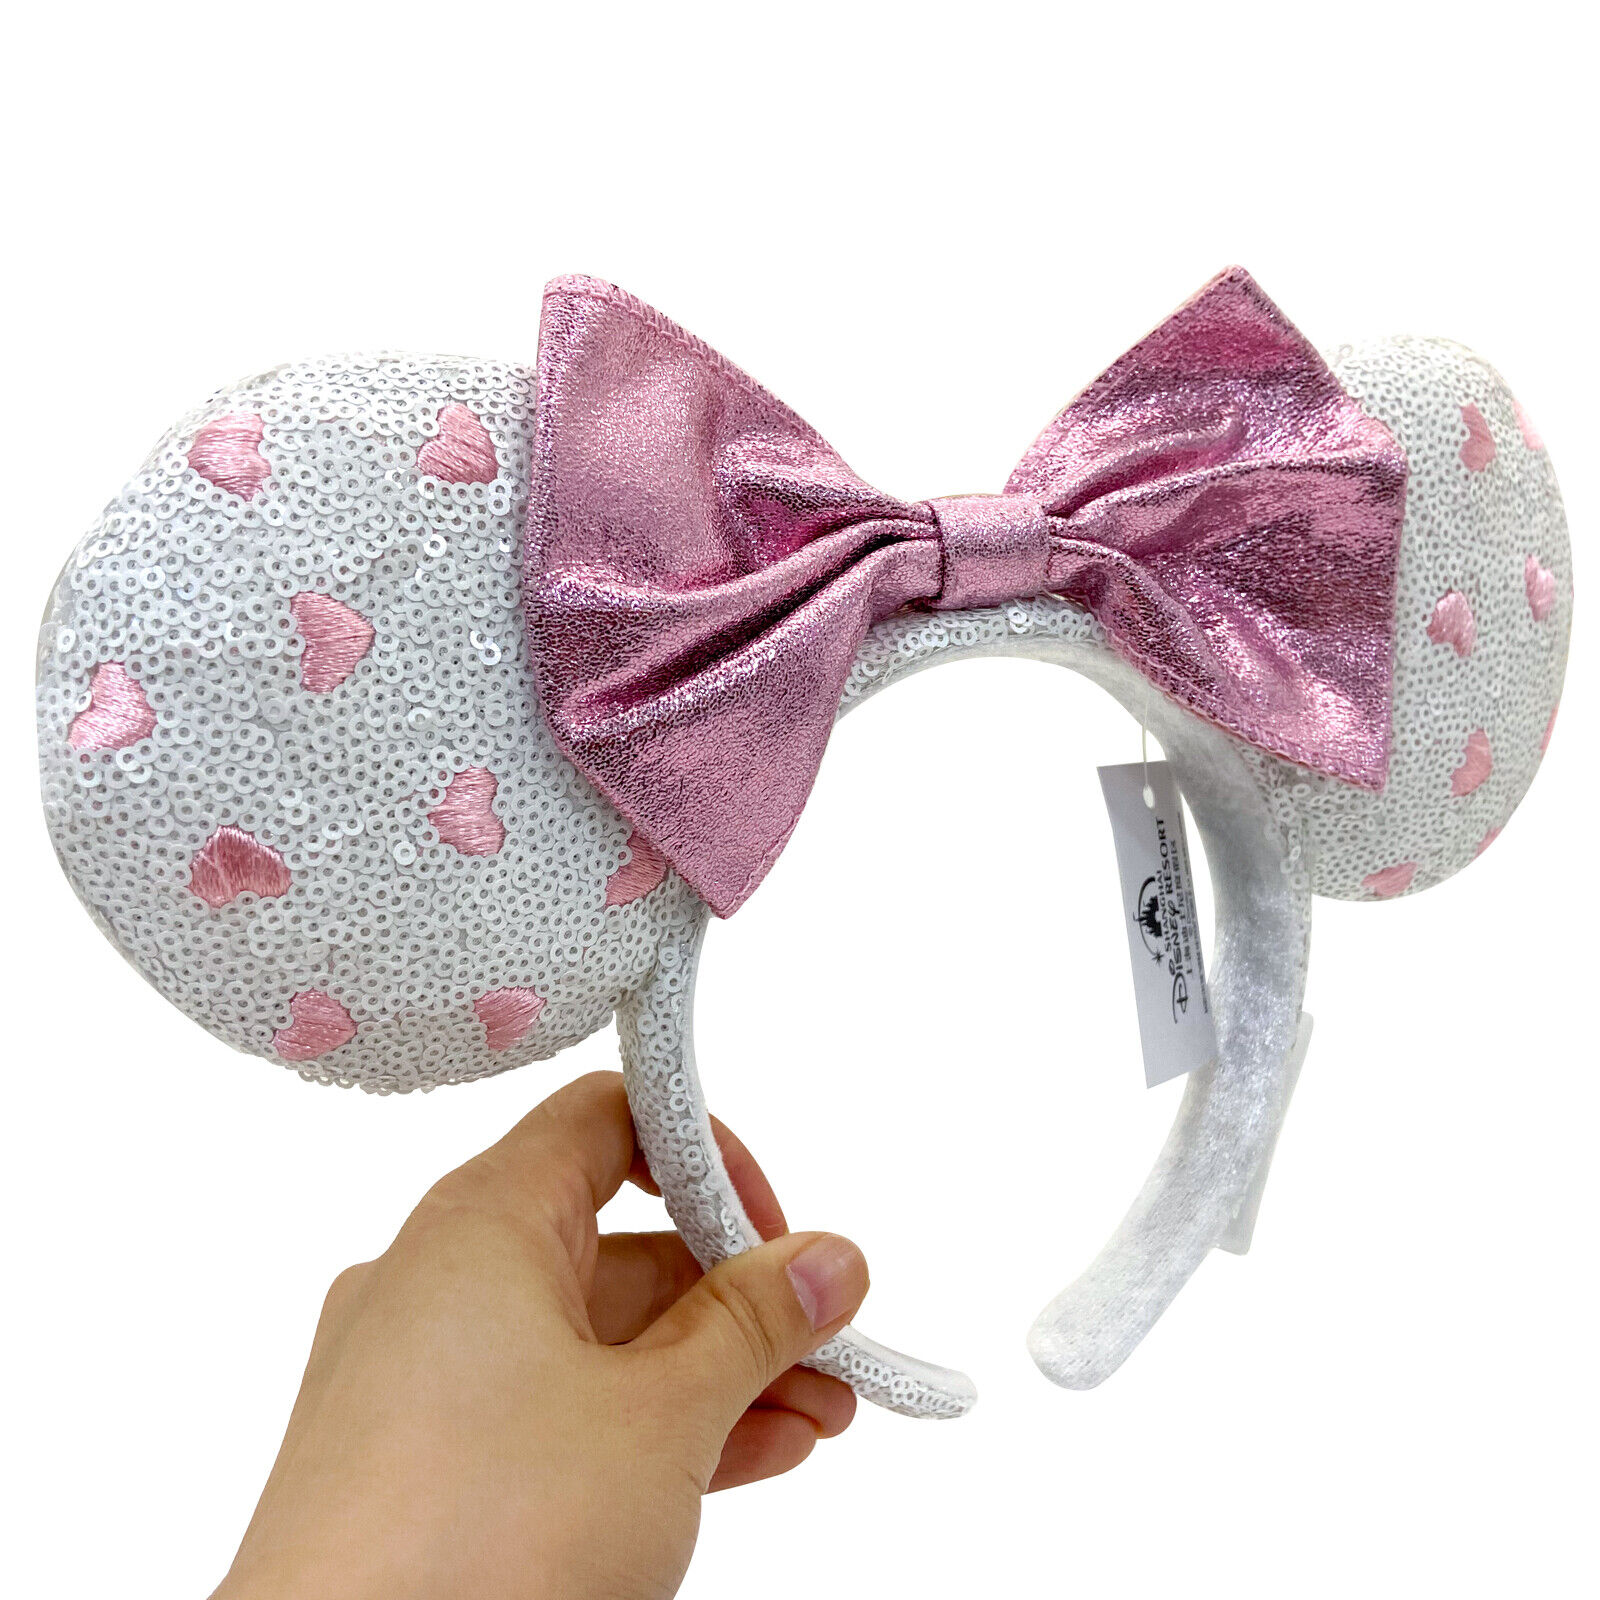 DisneyParks White Sequin Pink Heart Minnie Mouse Bow Sequins Ears Headband Ears